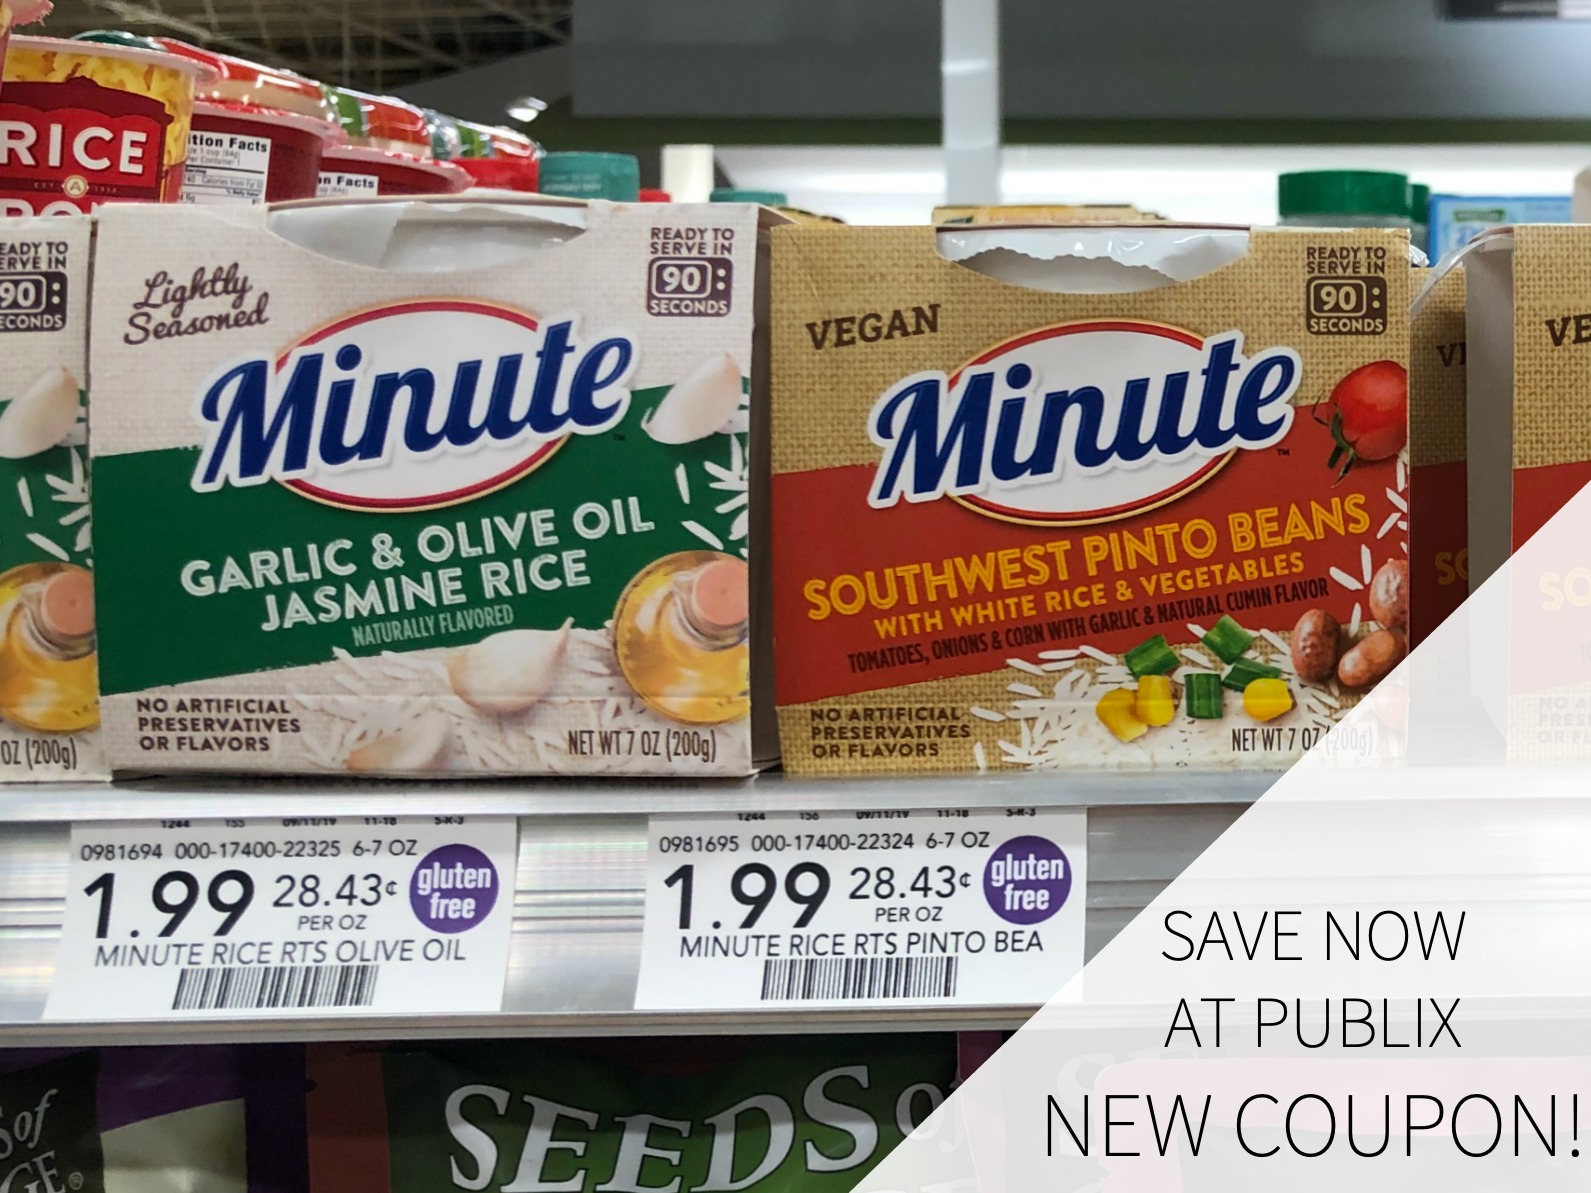 Grab Savings On Minute Rice At Publix – Try New Minute Ready To Serve & Save!